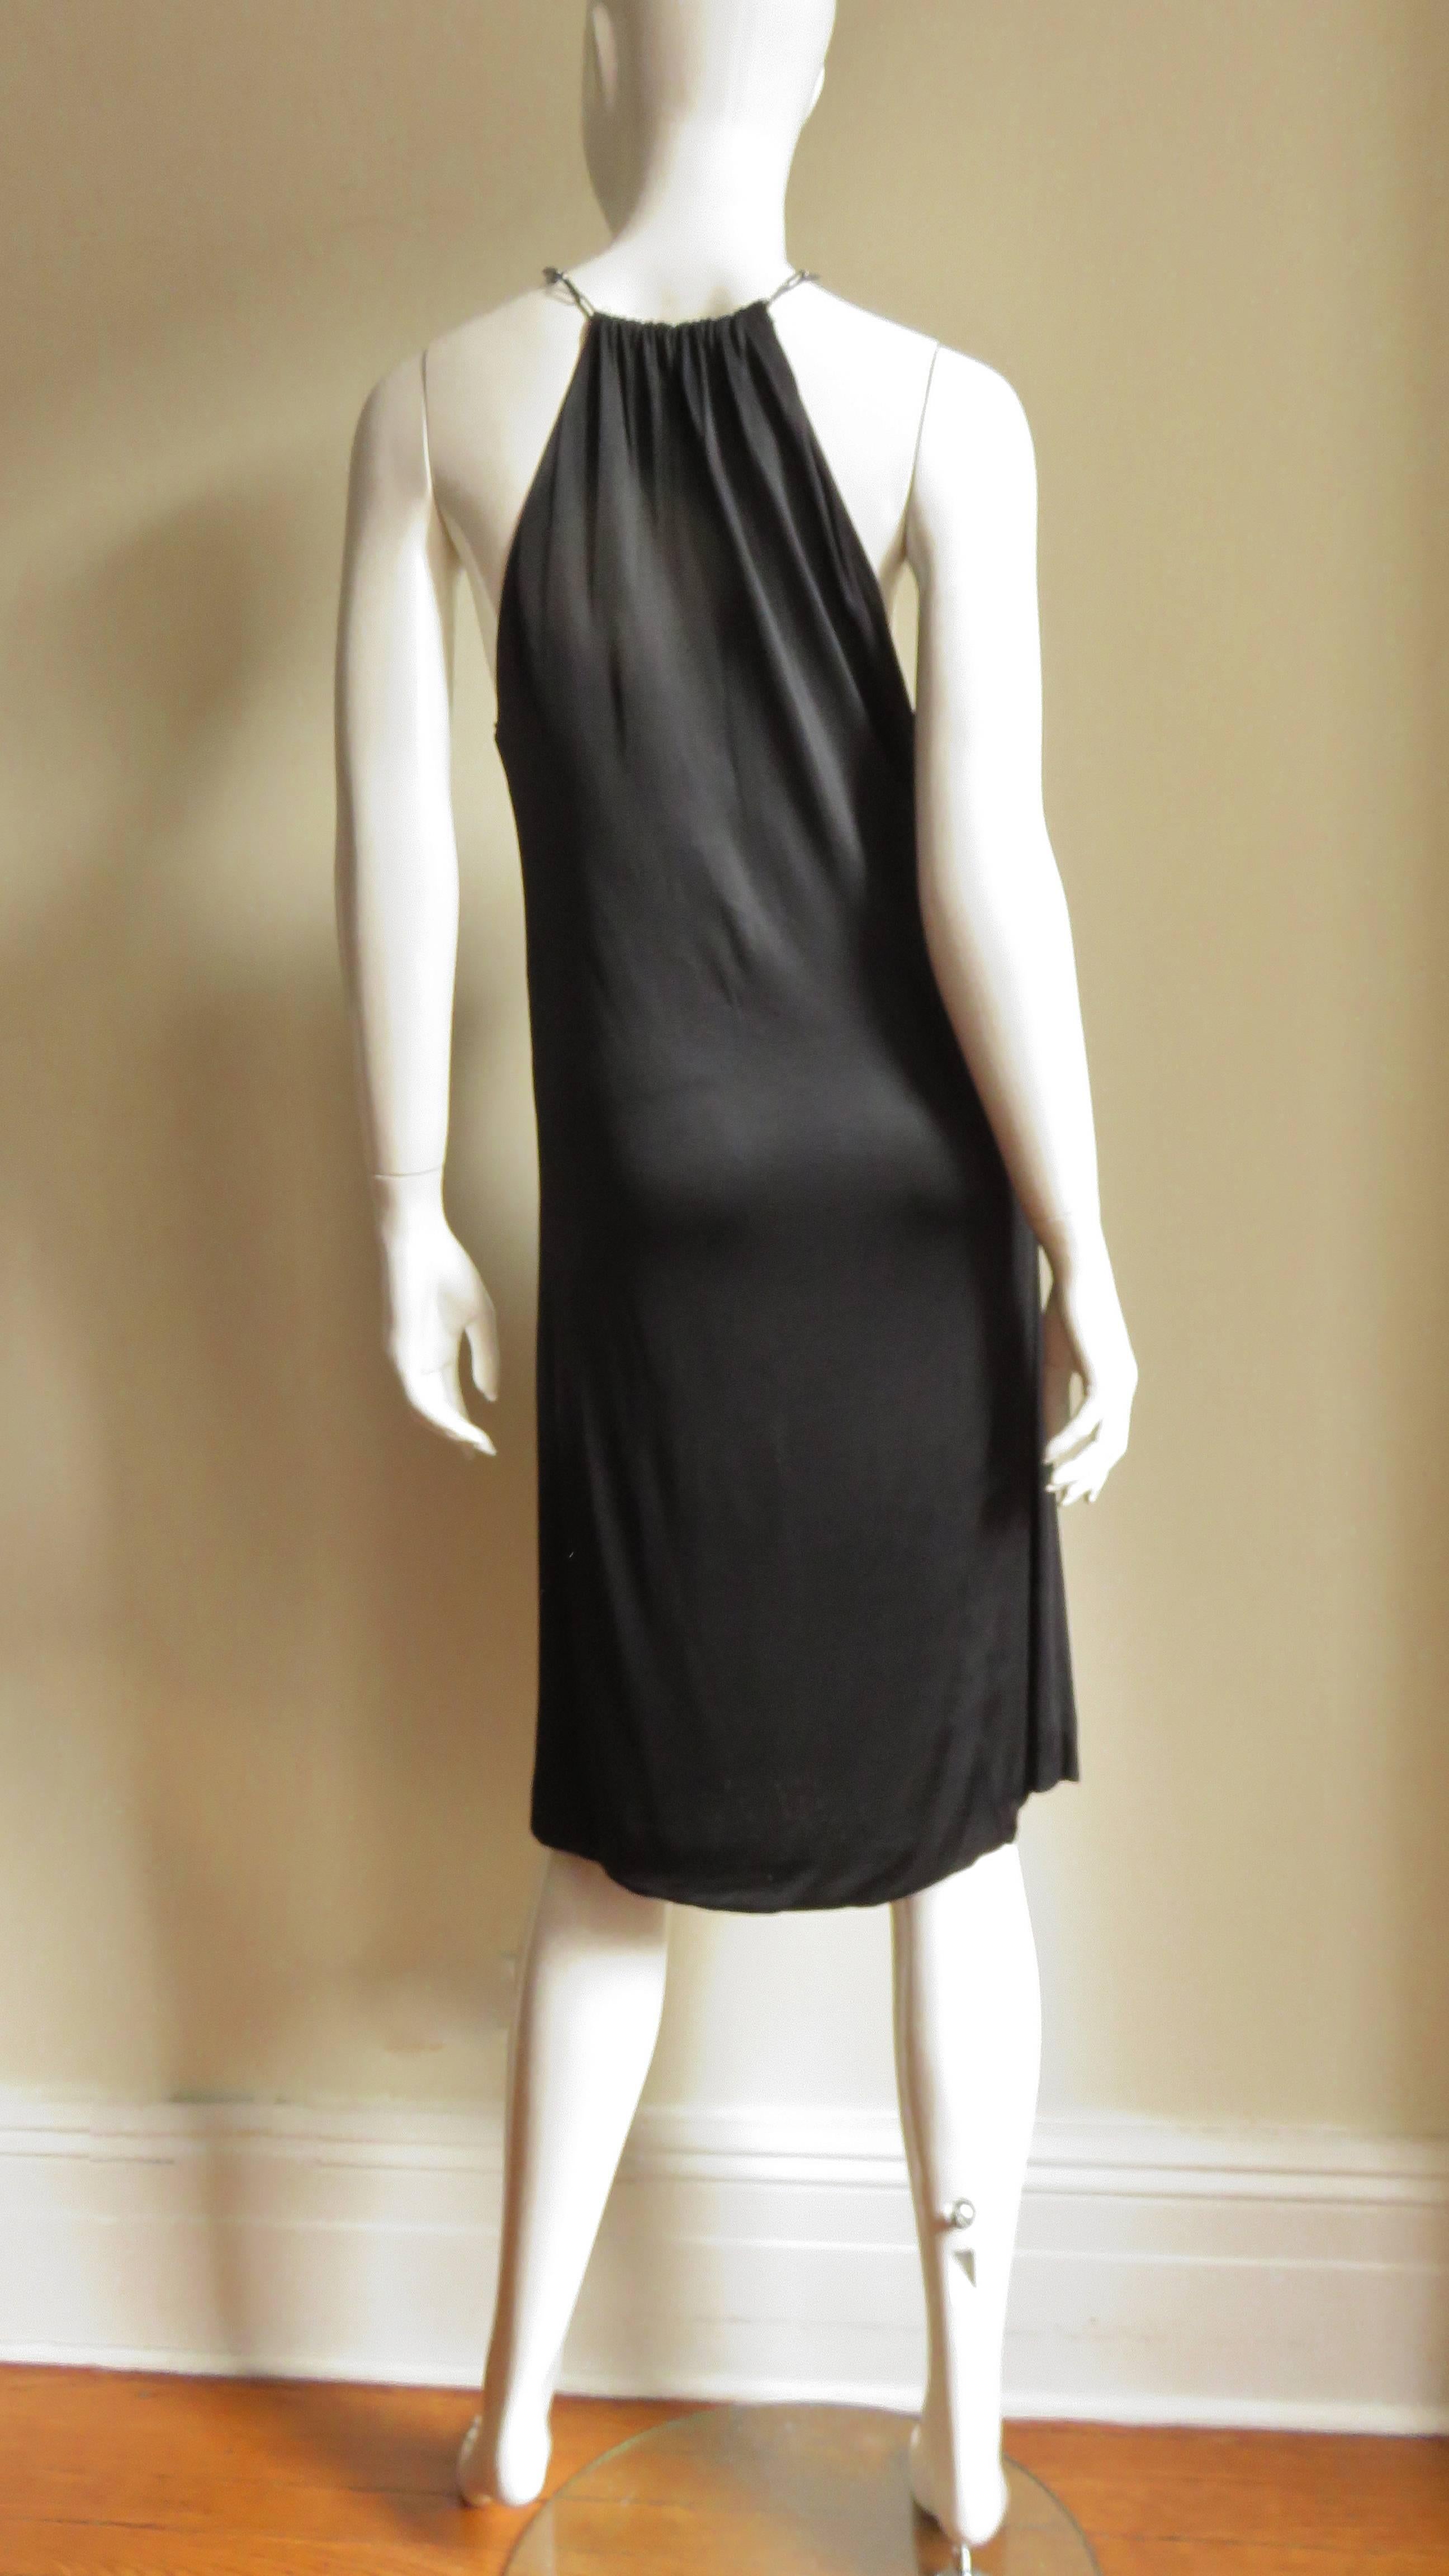 Tom Ford For Gucci Cut Out Silk Dress S/S 2000 For Sale 4